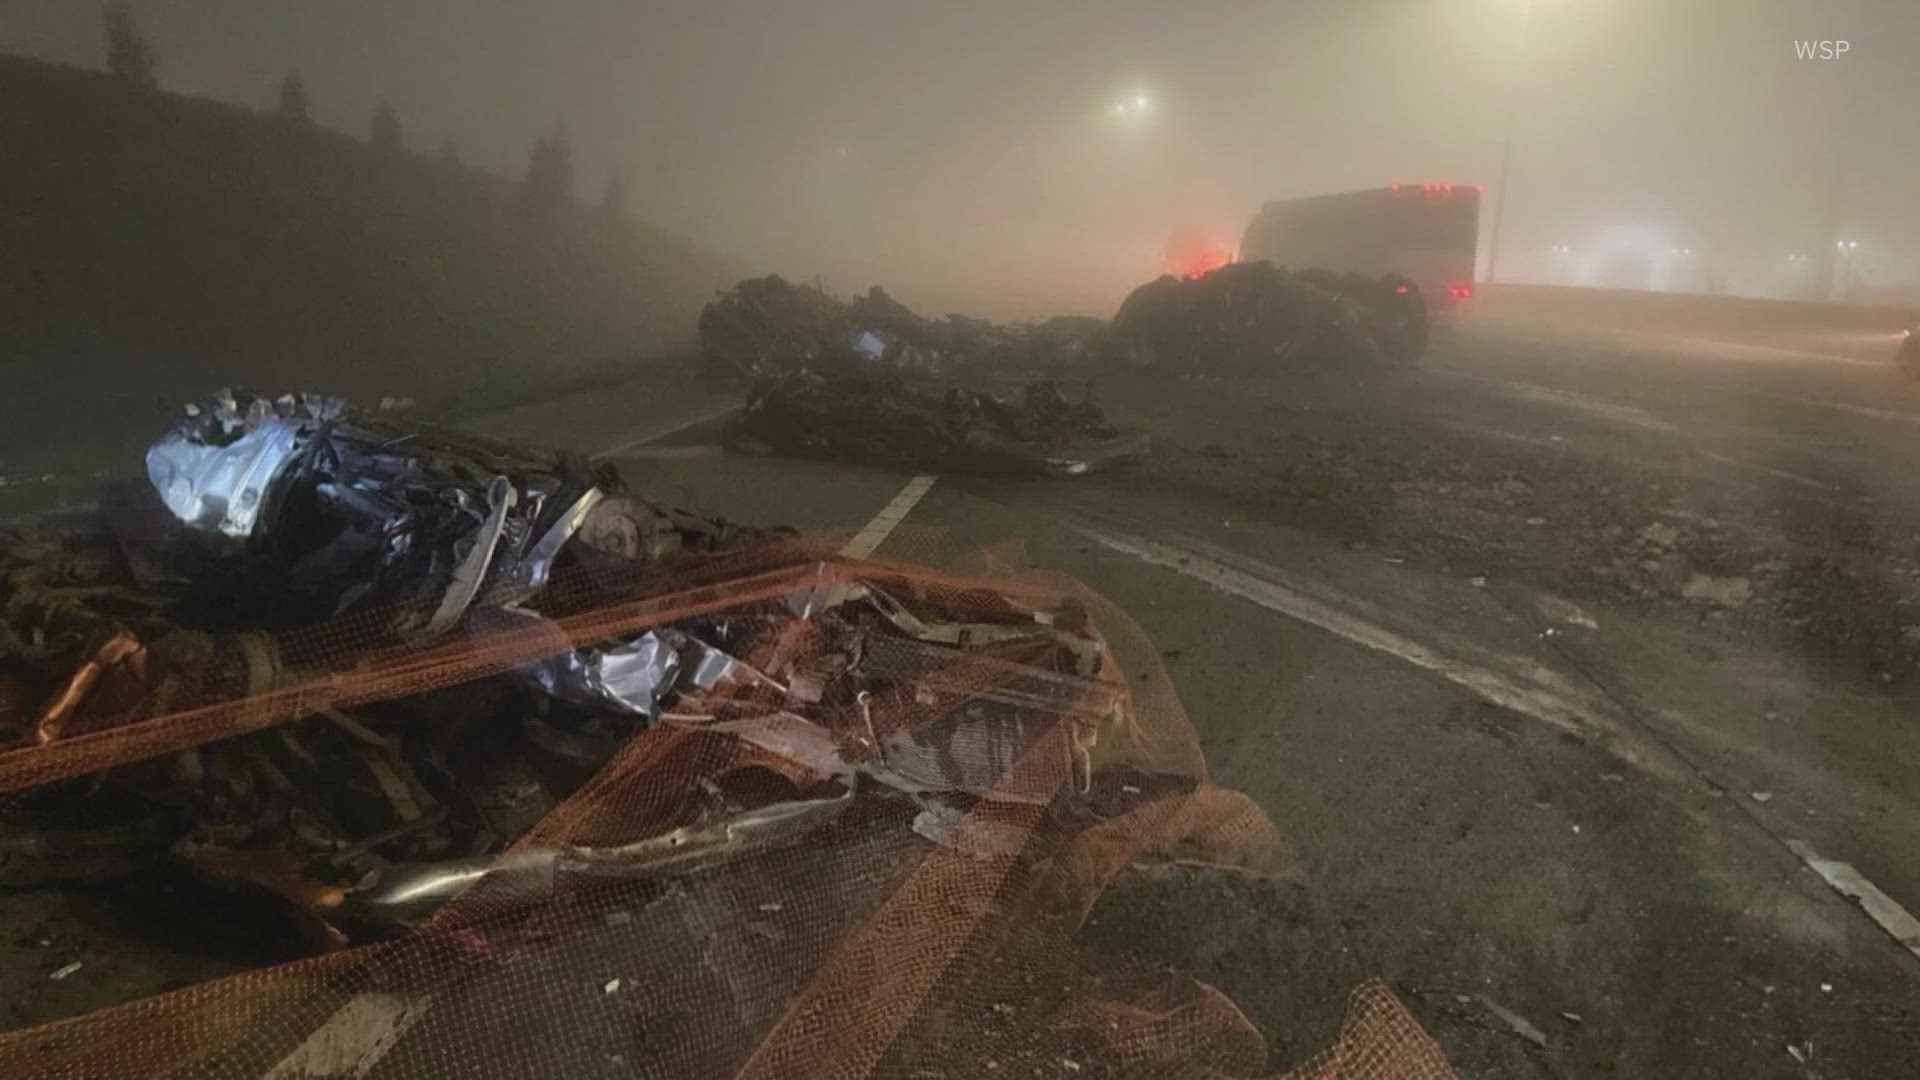 A semi-truck hauling junk vehicles rolled and spilled the cars onto southbound I-5 early Wednesday morning, closing part of the highway completely for hours.